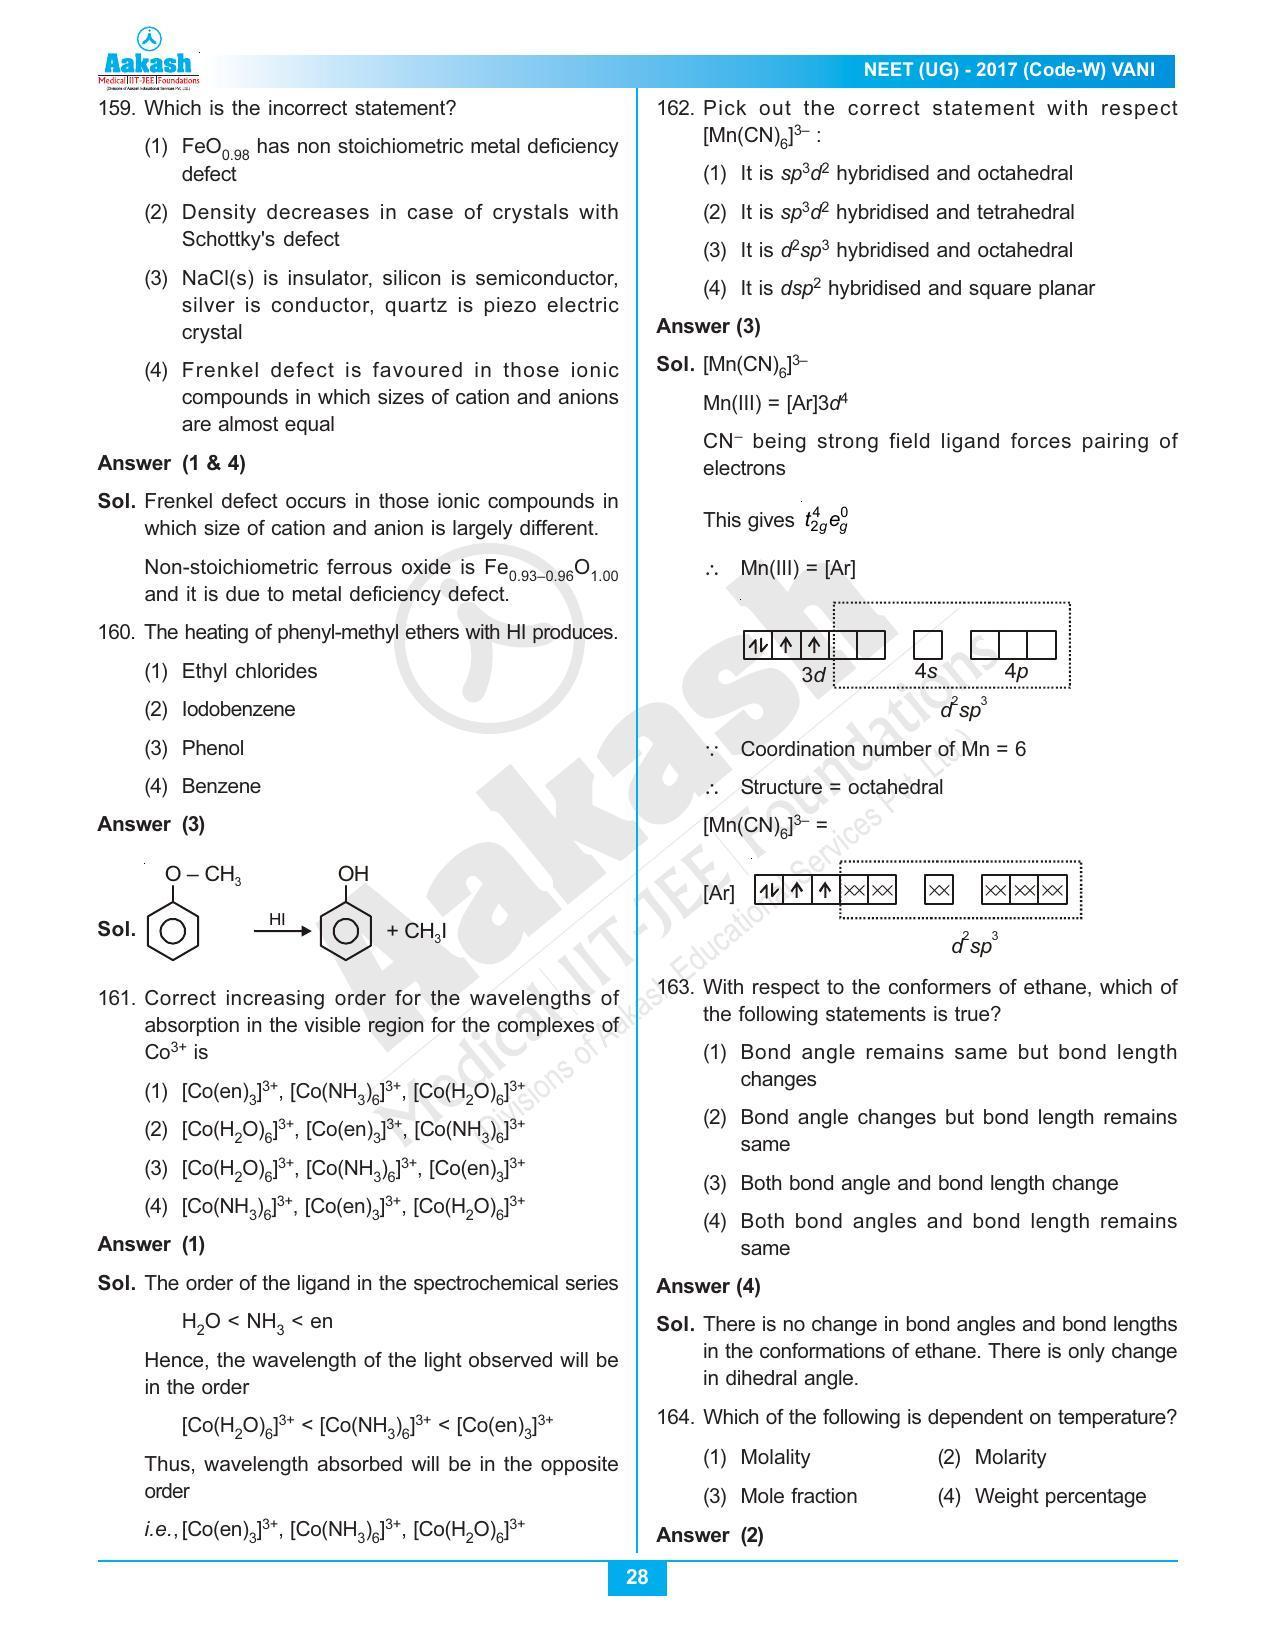  NEET Code W 2017 Answer & Solutions - Page 28